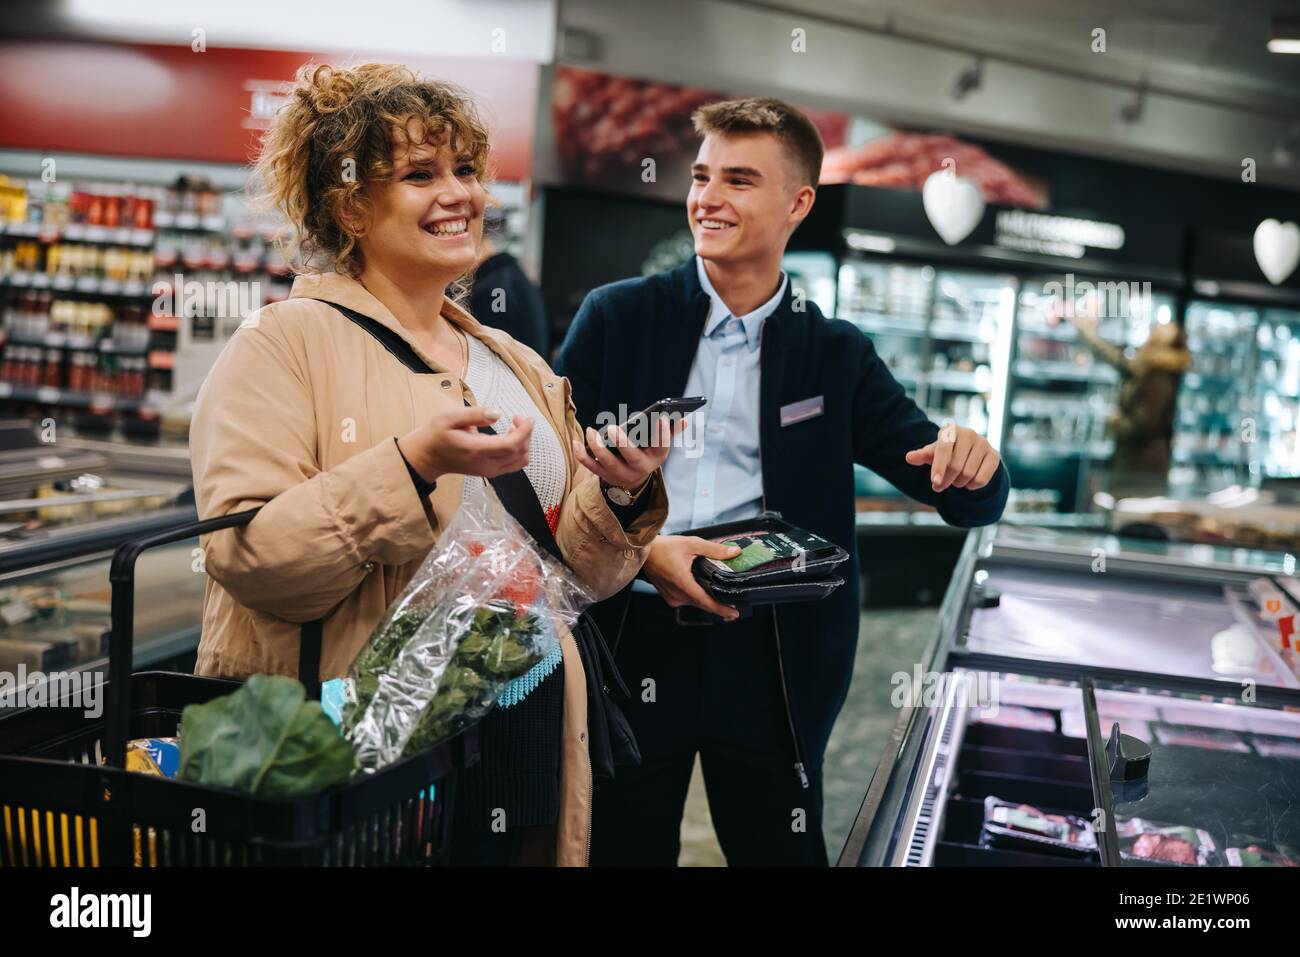 Smiling female shopper with assistant in grocery store. Happy woman customer shopping in supermarket. Stock Photo